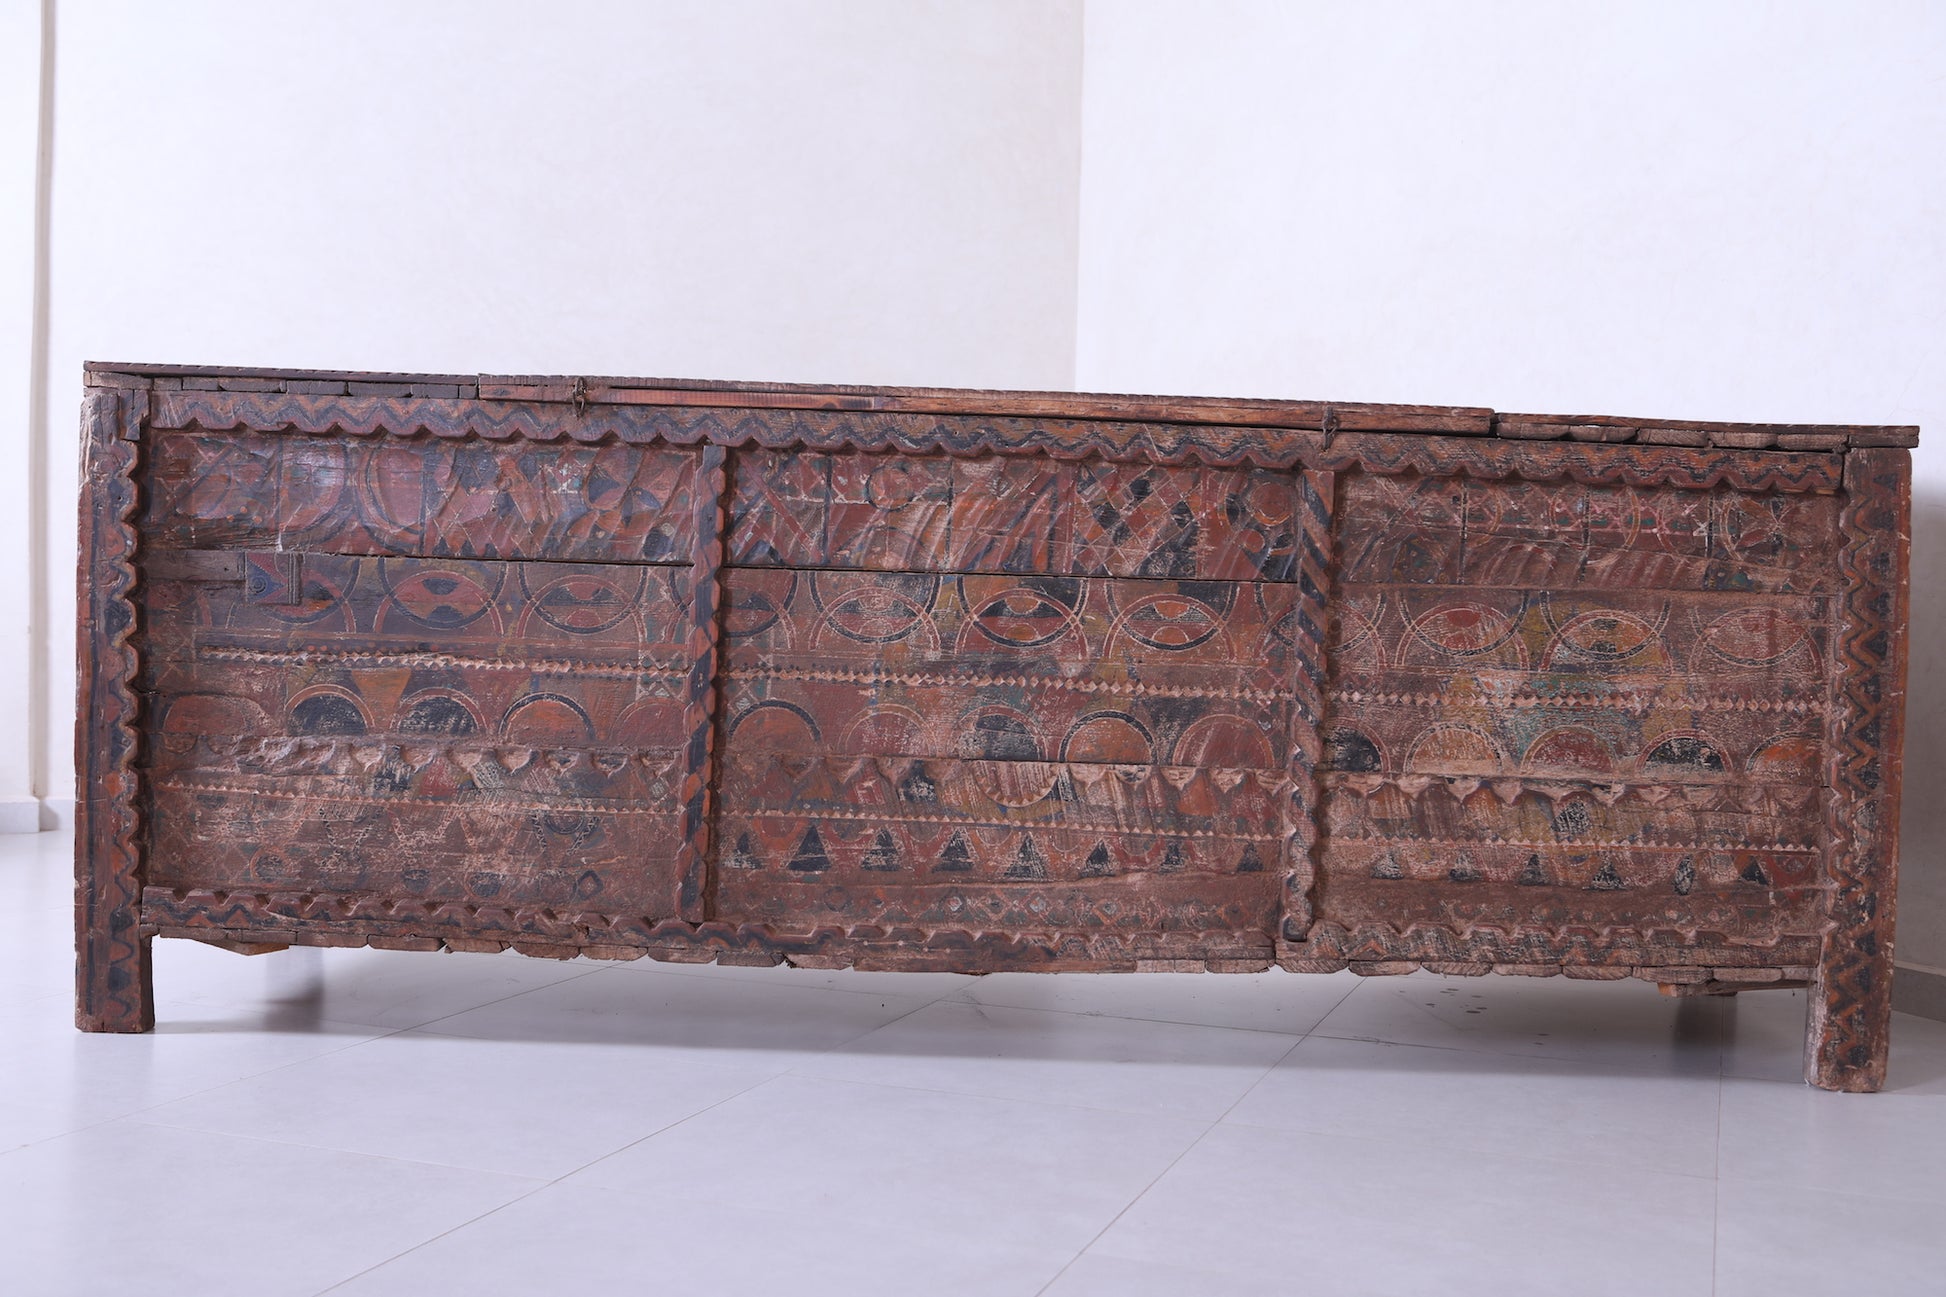 Vintage Moroccan chest H 3.1 FT x W 8.3 FT x D 2.6 FT - wood chest